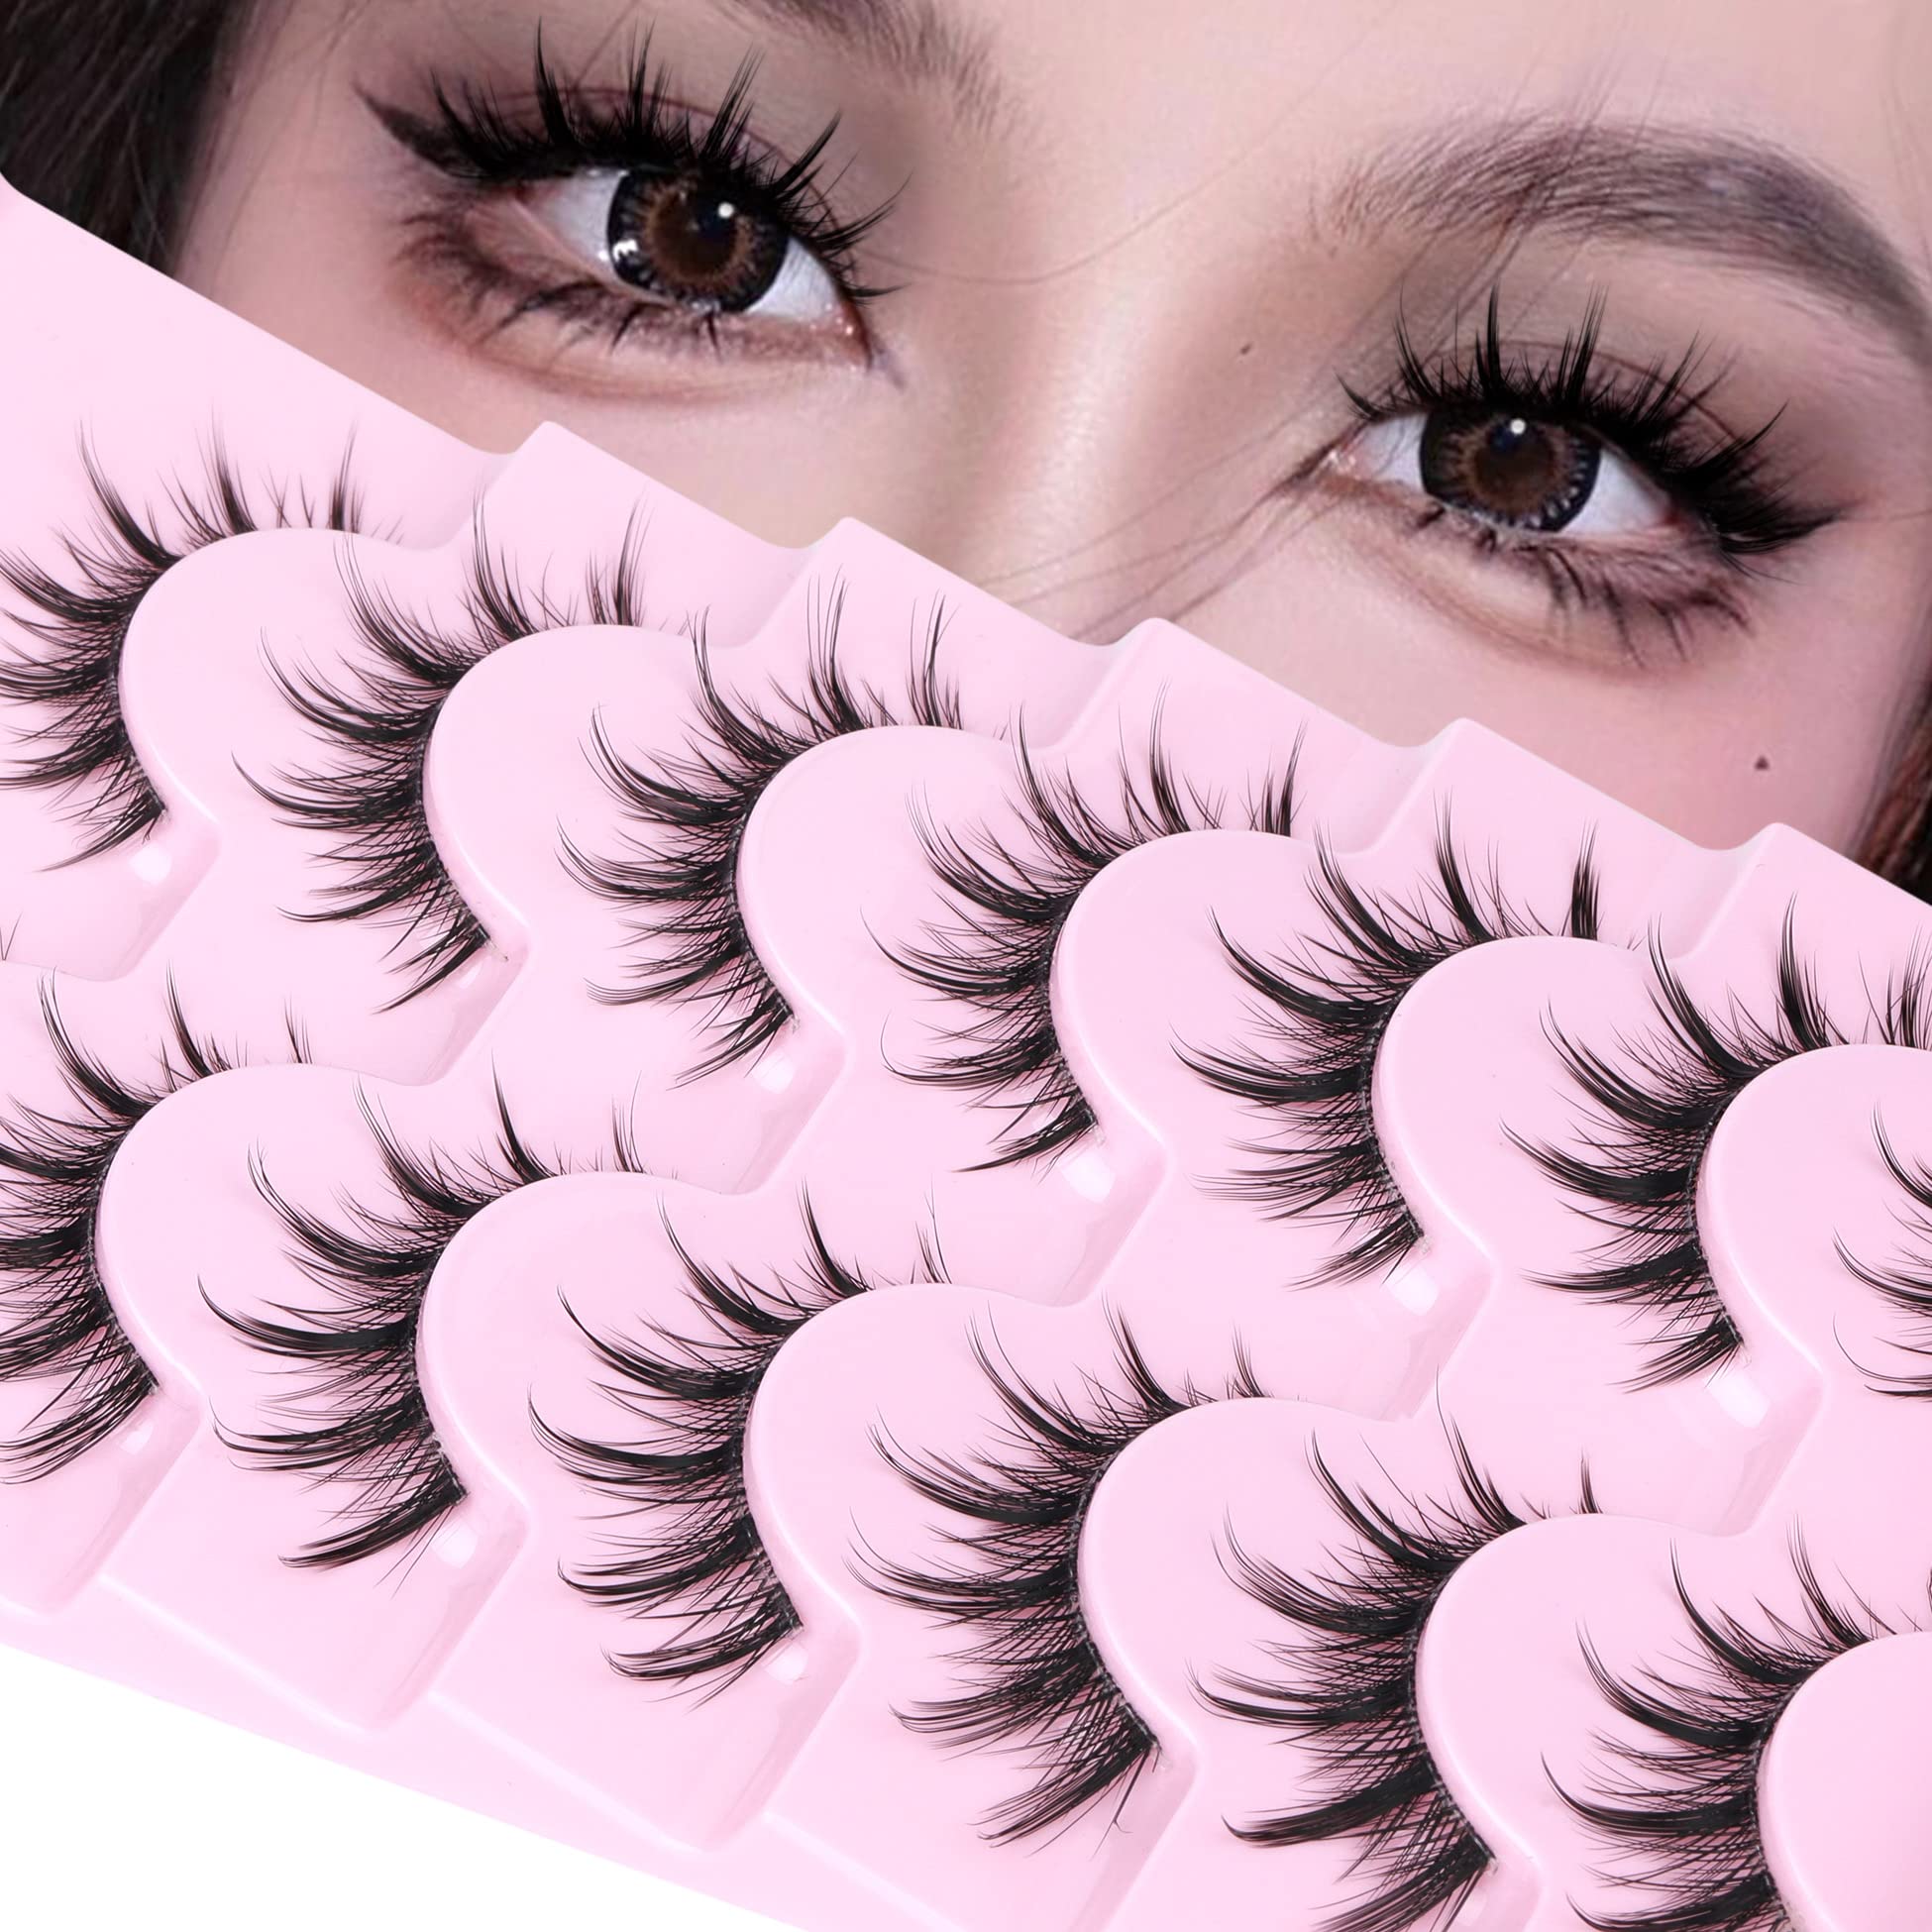 Amazon.com: Anime Eyelashes Spiky Clear Band Japanese Manga Lashes Wispy  Natural Look Asian Lash 7 Pairs Pack by ALICE : Beauty & Personal Care